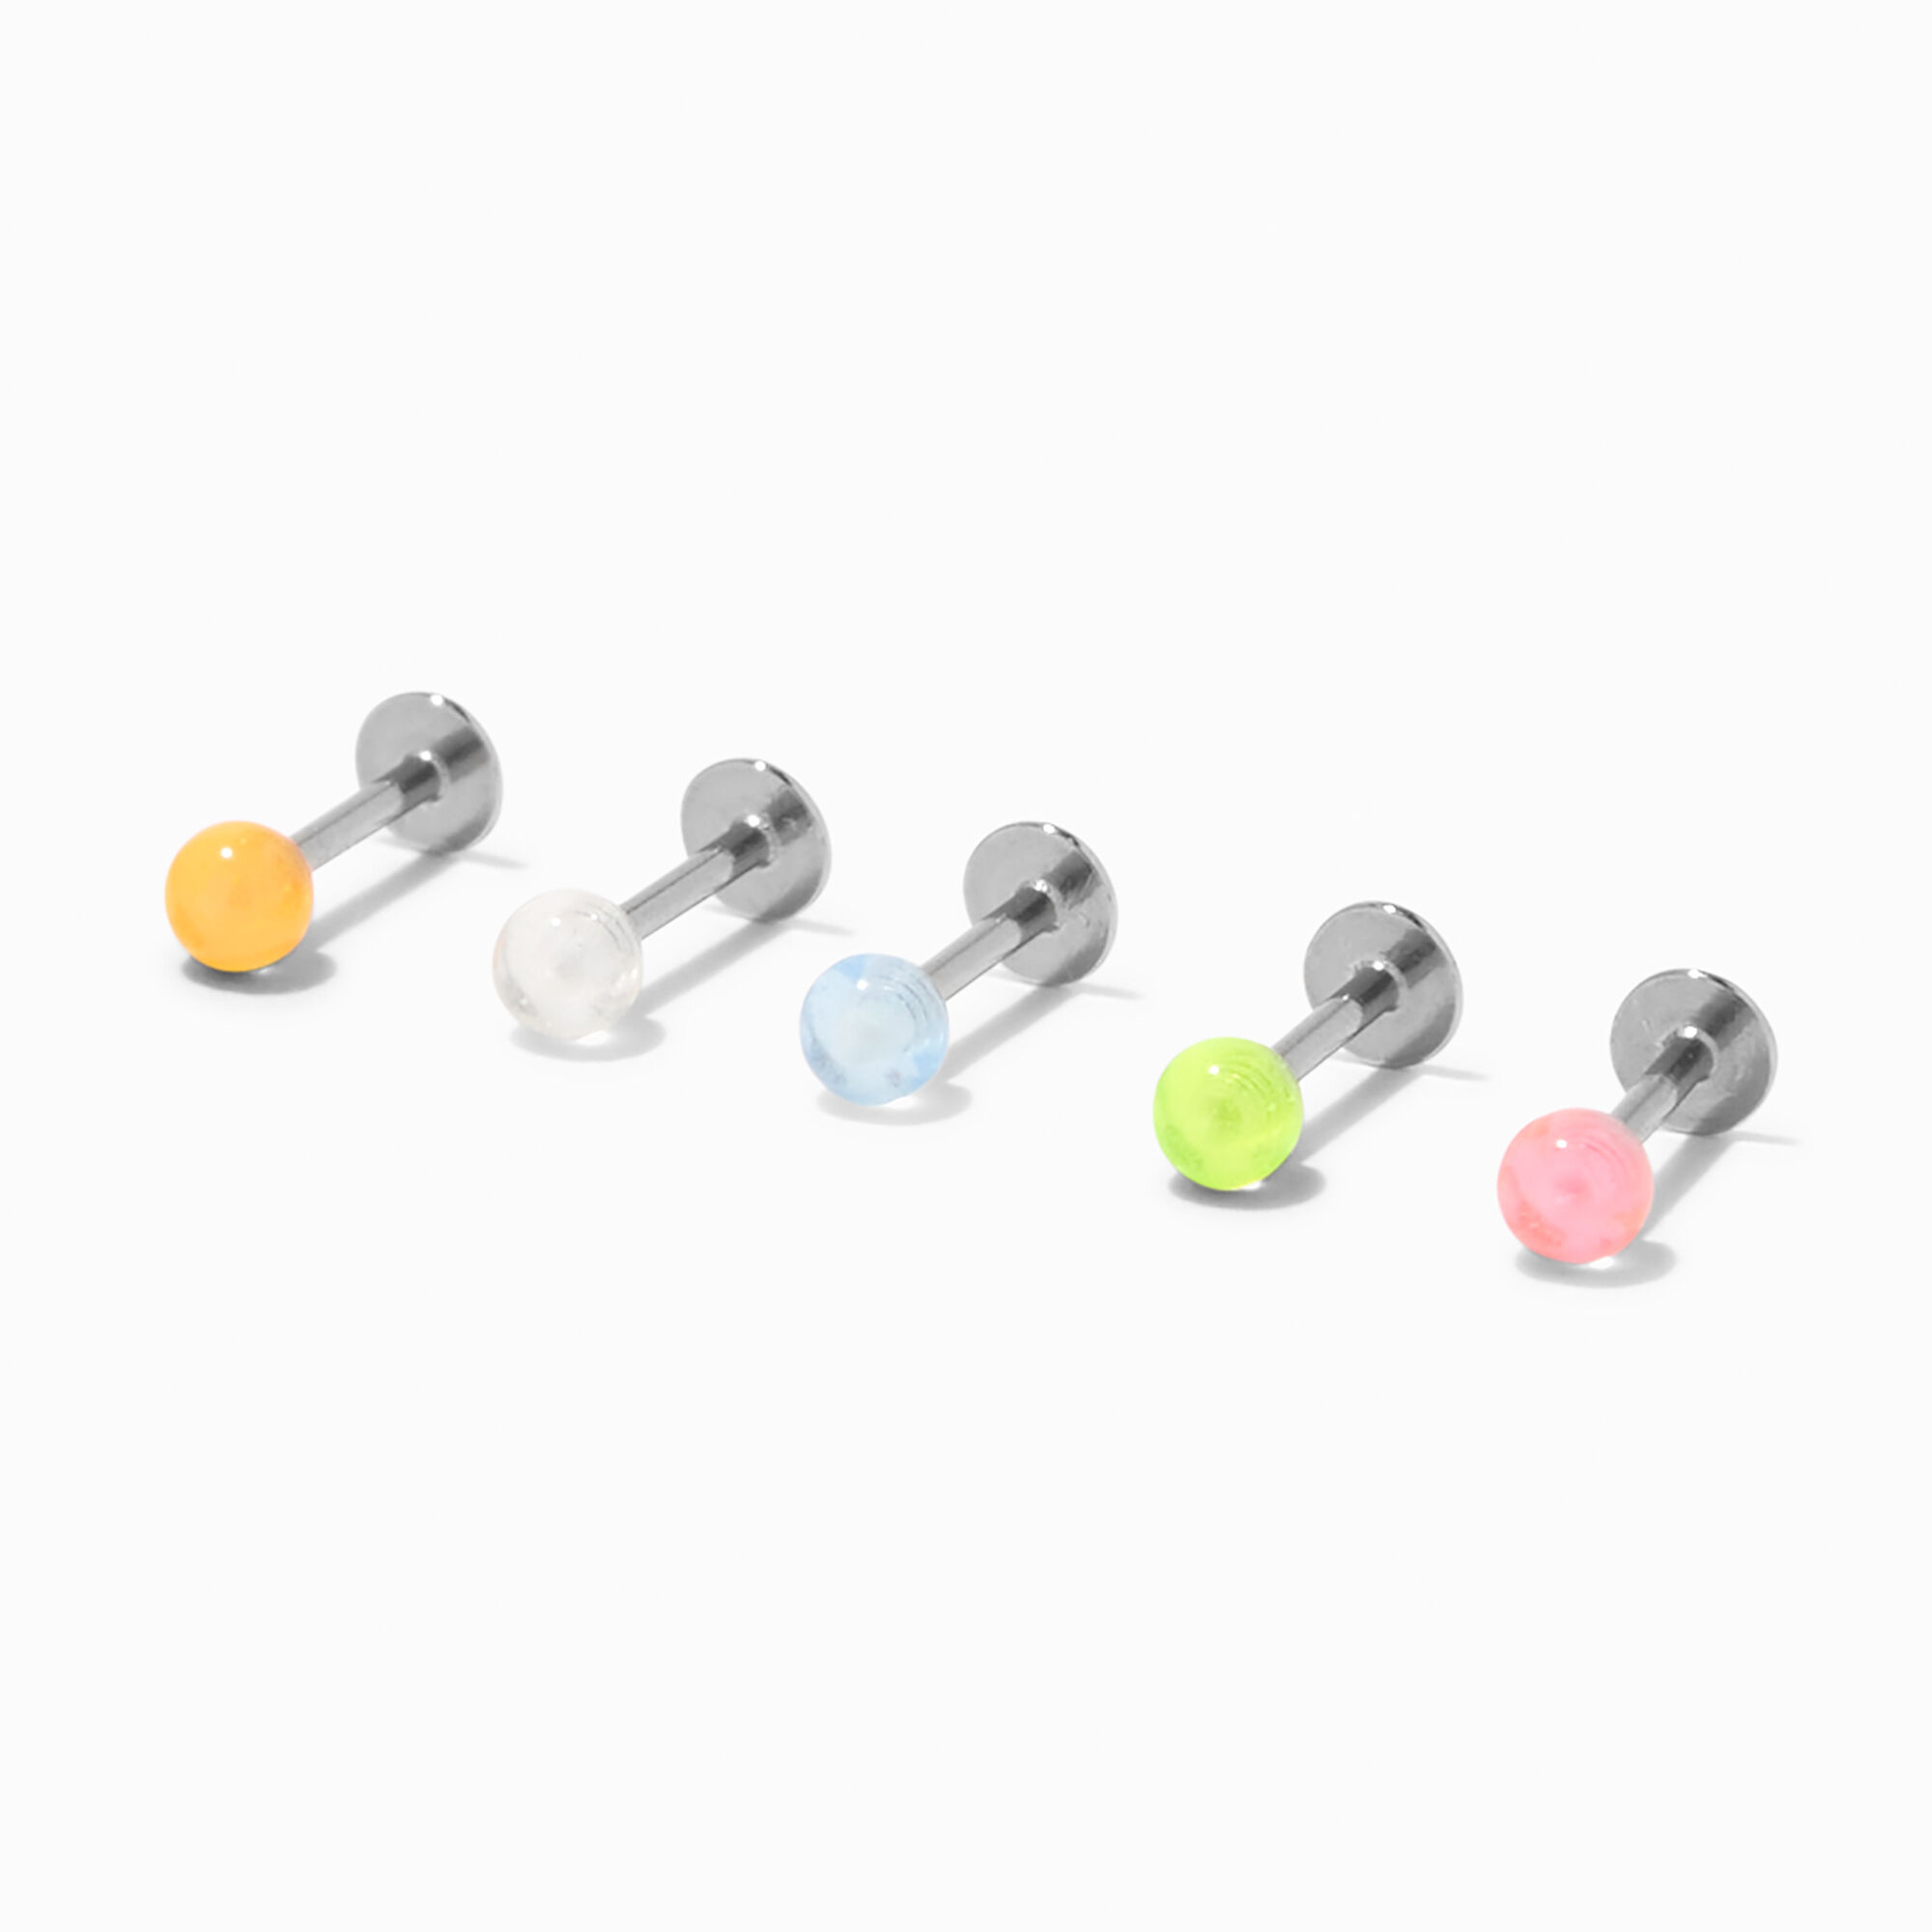 View Claires Glow In The Dark Ball 16G Tragus Flatback Stud Earring 5 Pack Silver information